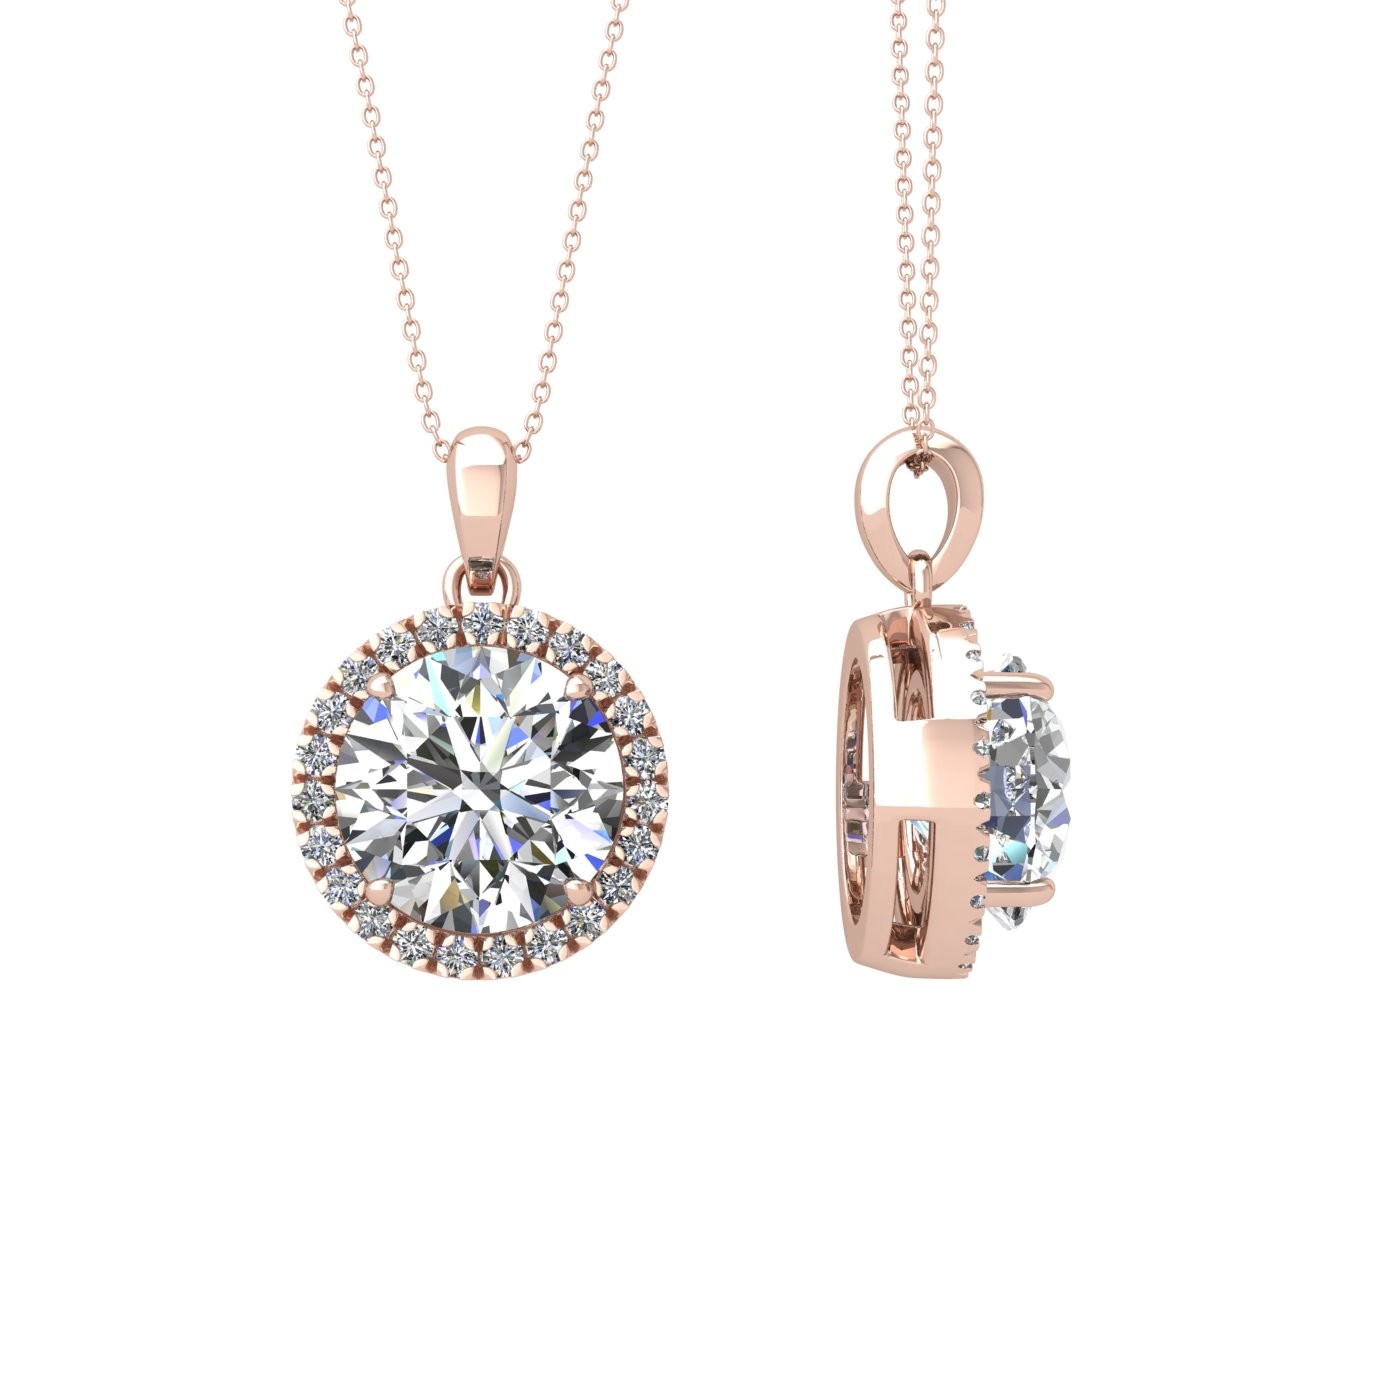 18k rose gold  1,5 ct 4 prong round shape diamond pendant with diamond pavÉ set halo including chain seperate from the pendant Photos & images